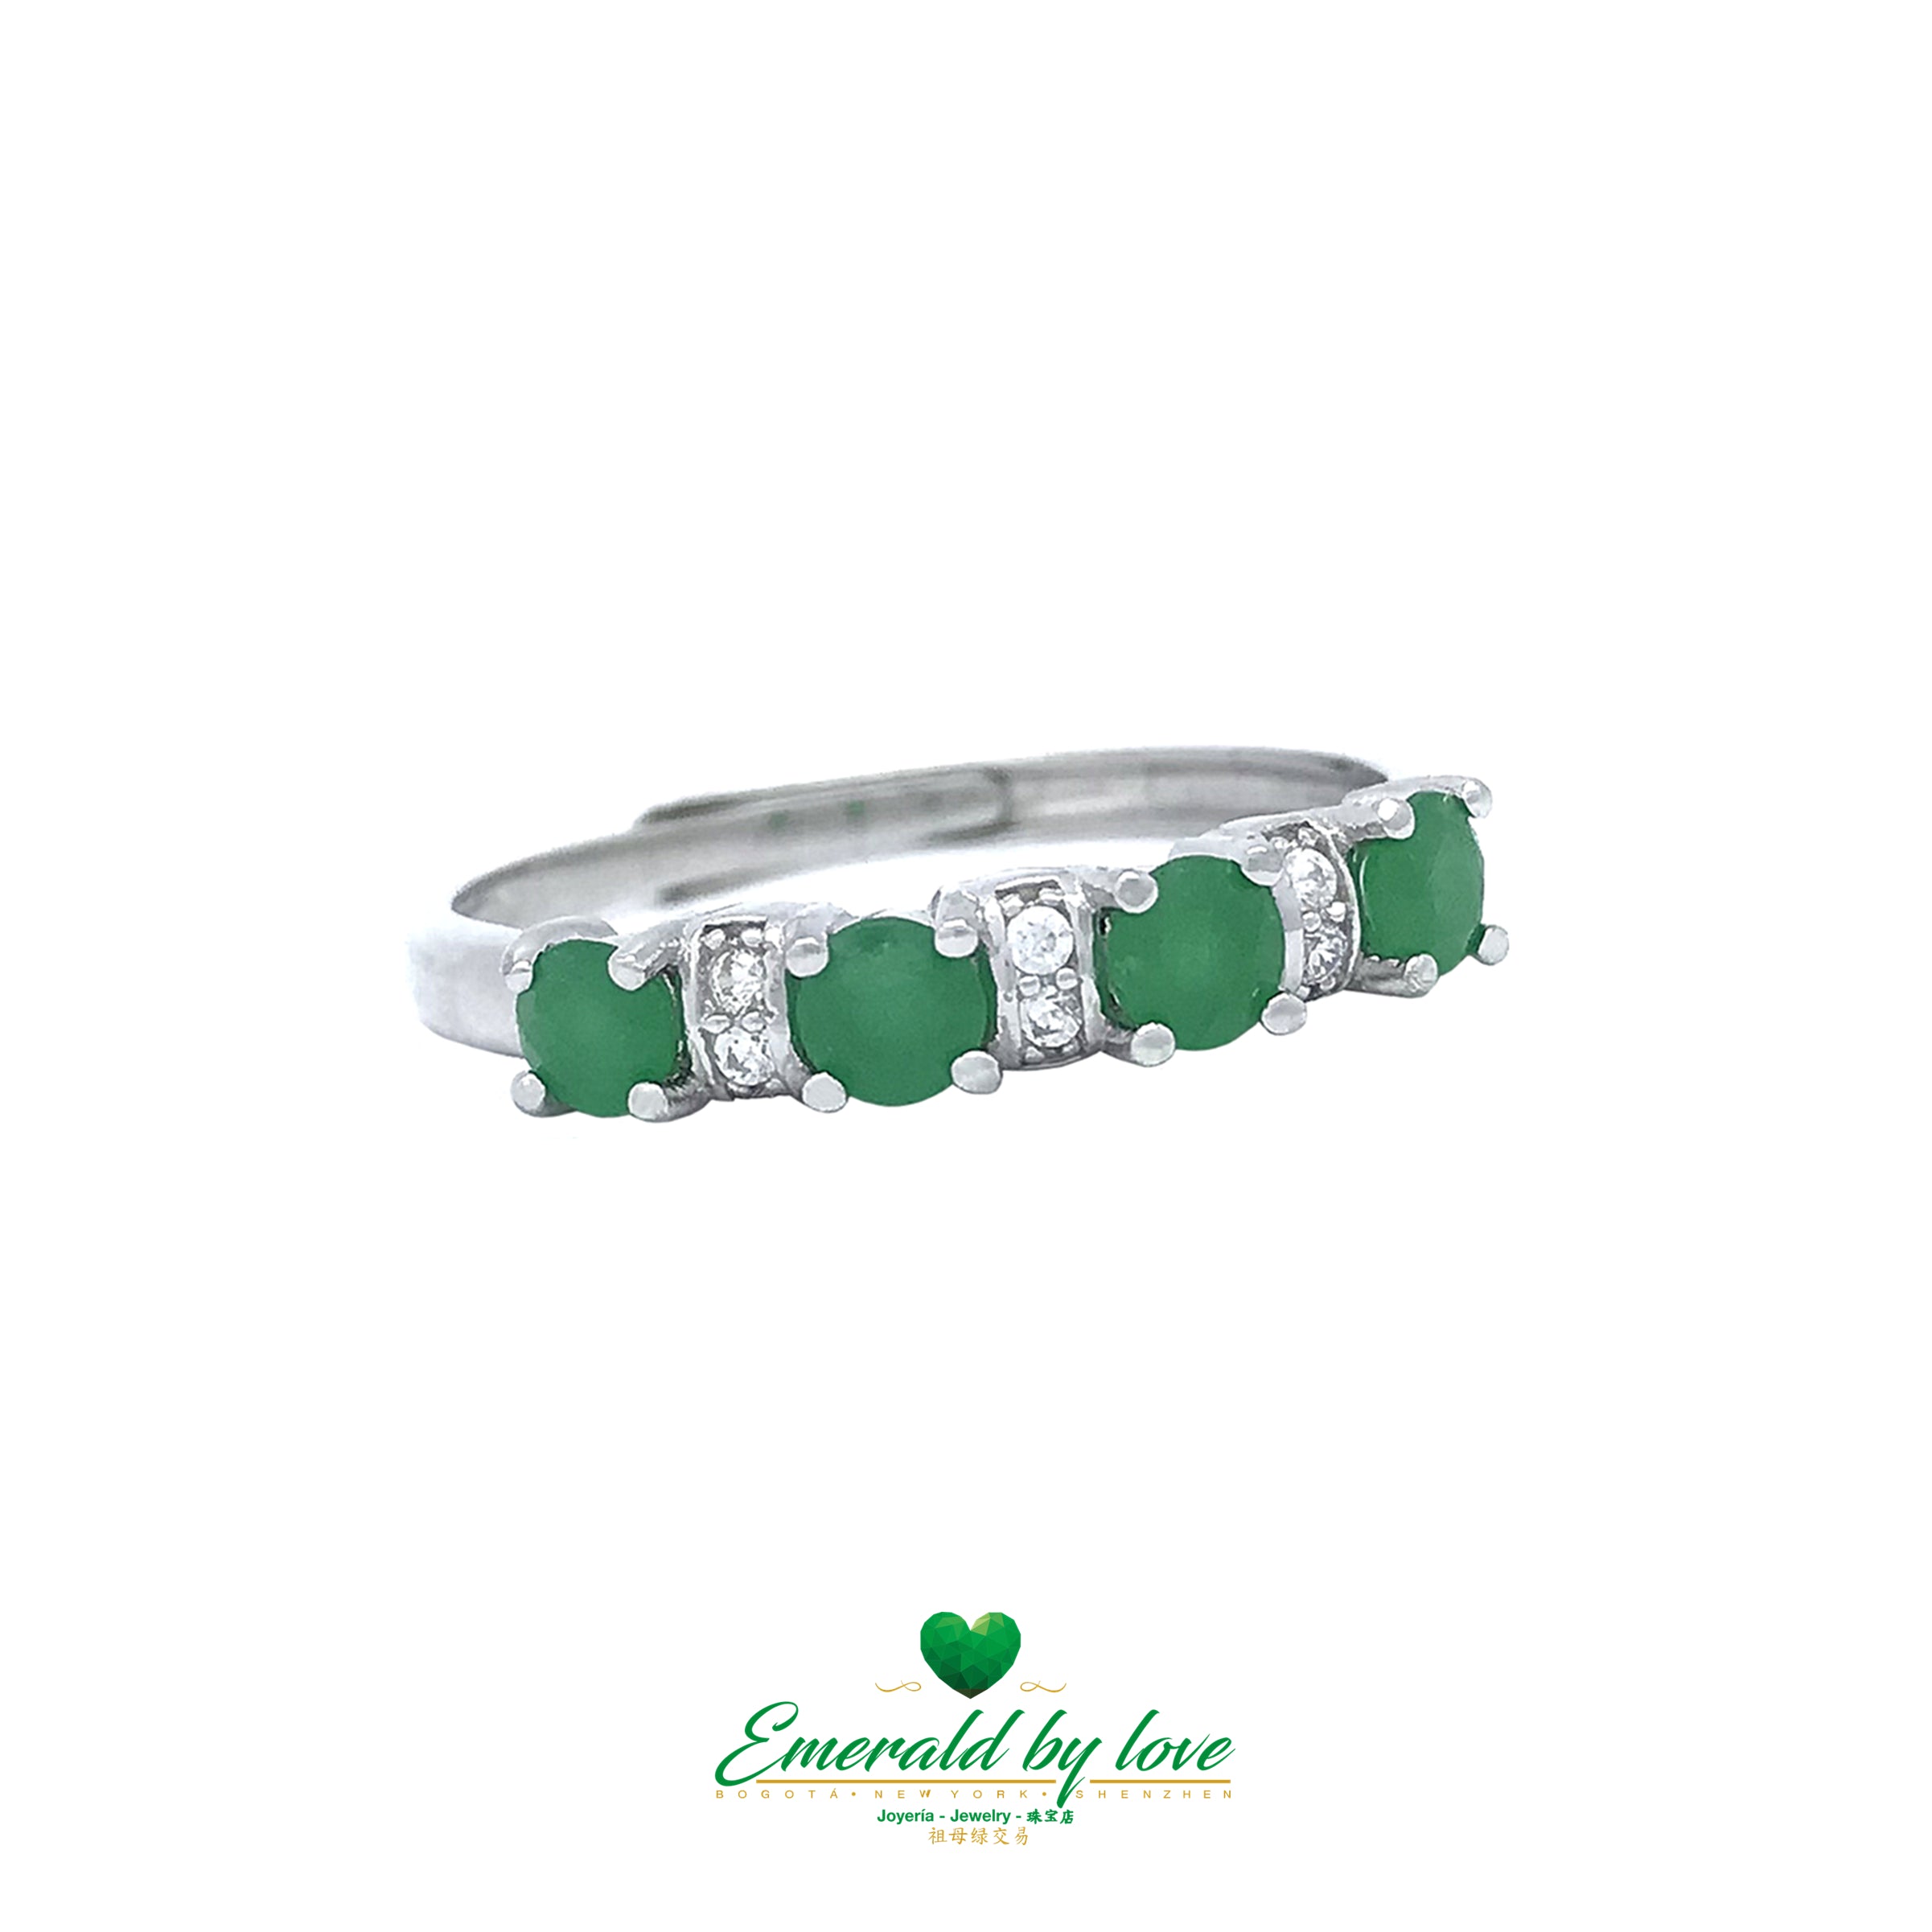 Timeless Glamour: Sterling Silver Half-Band Ring with Round Colombian Emeralds and Zirconias